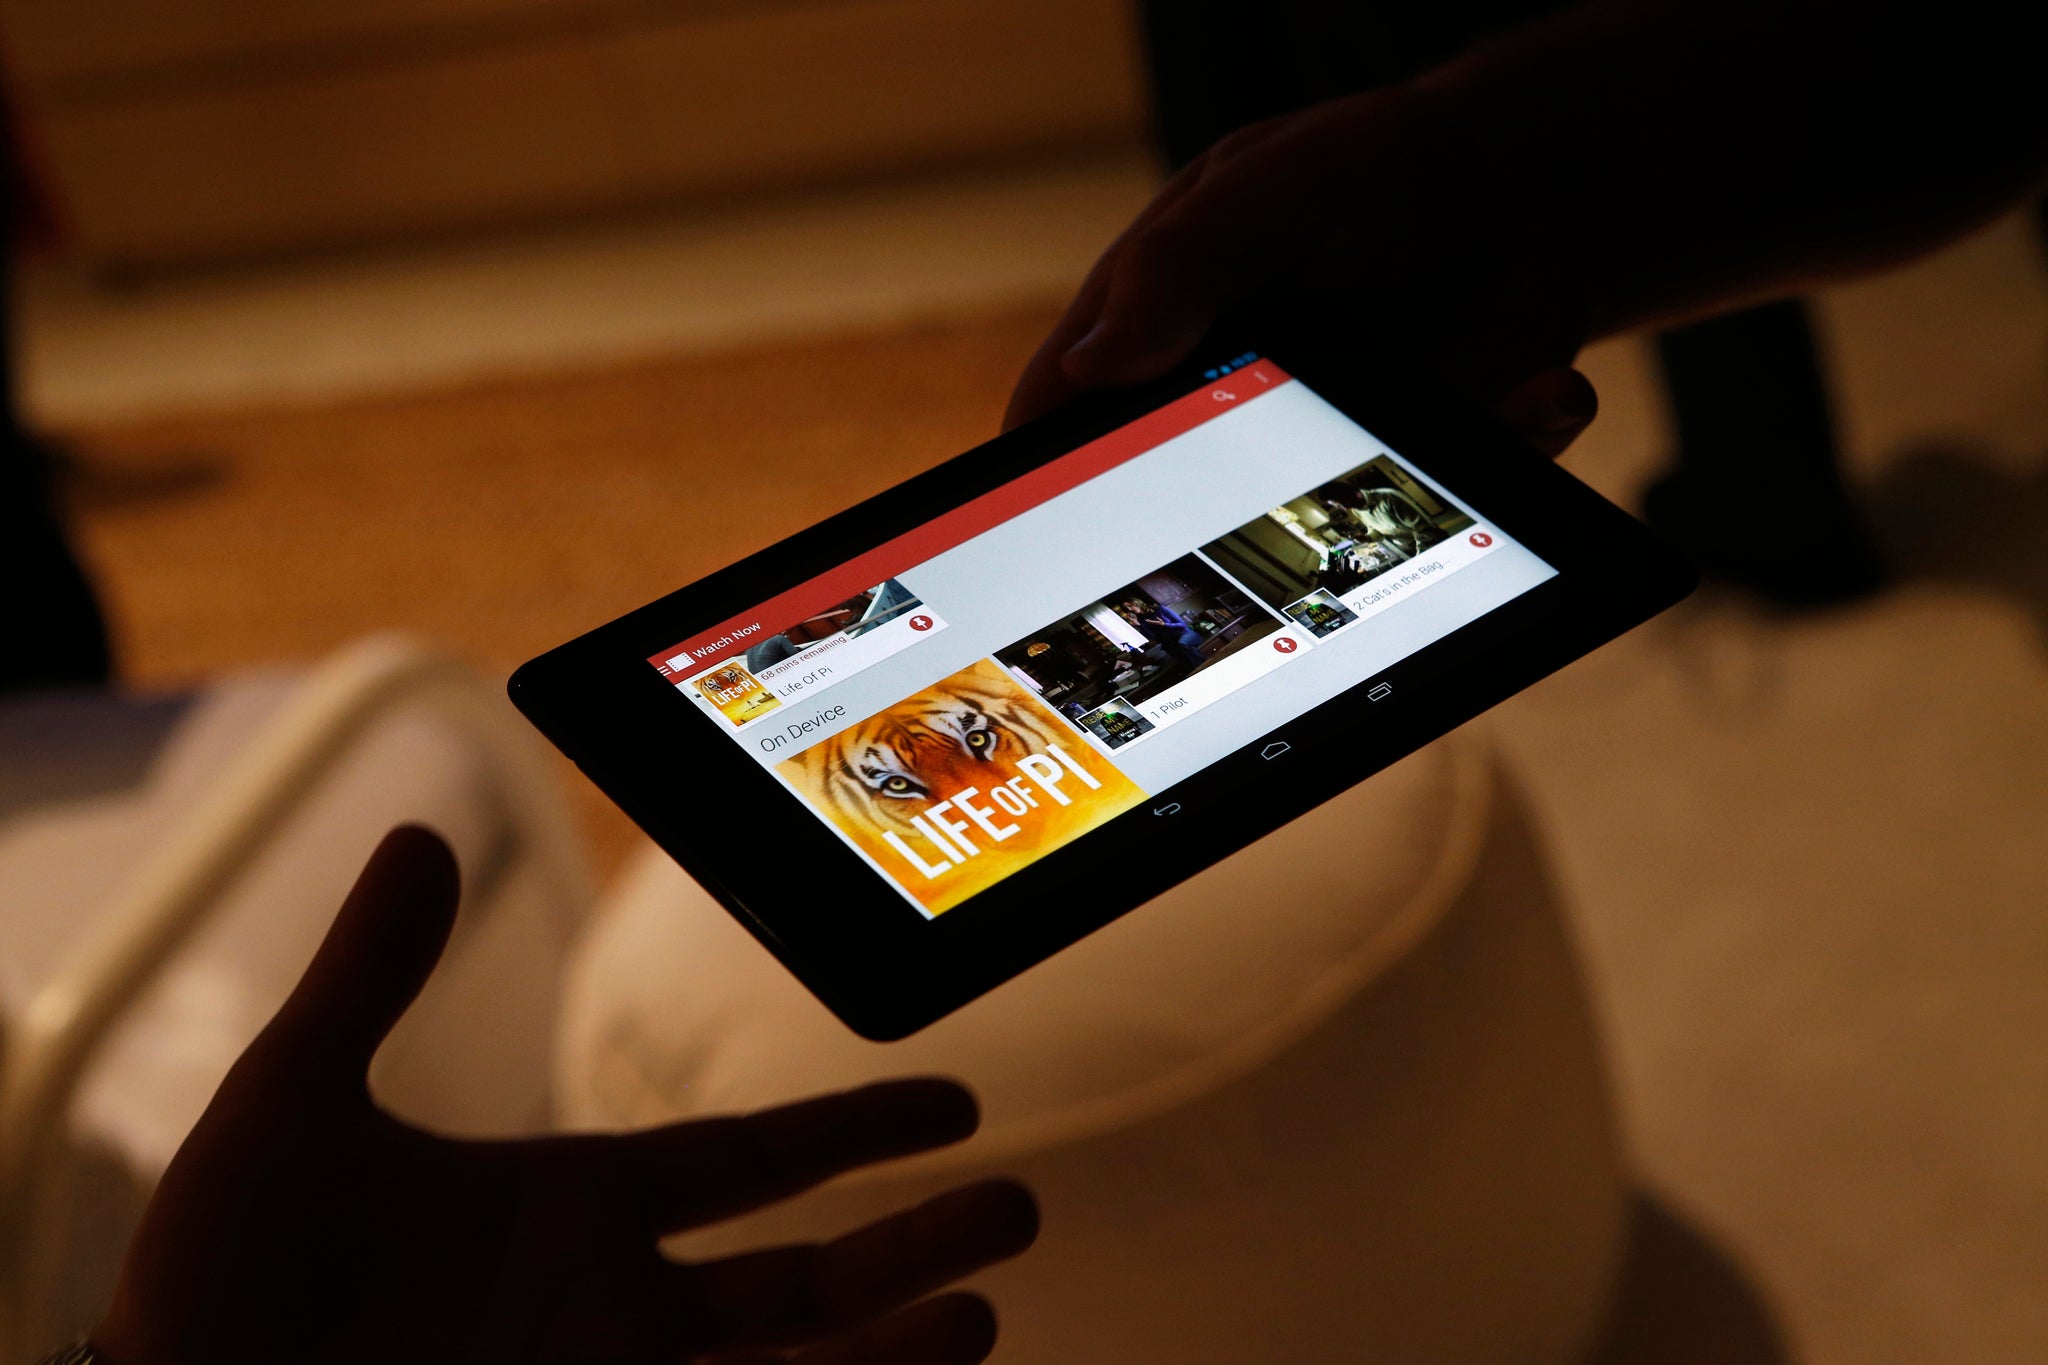 The new Nexus 7 boasts the highest screen quality of any 7-inch tablet as well as all-day battery life.